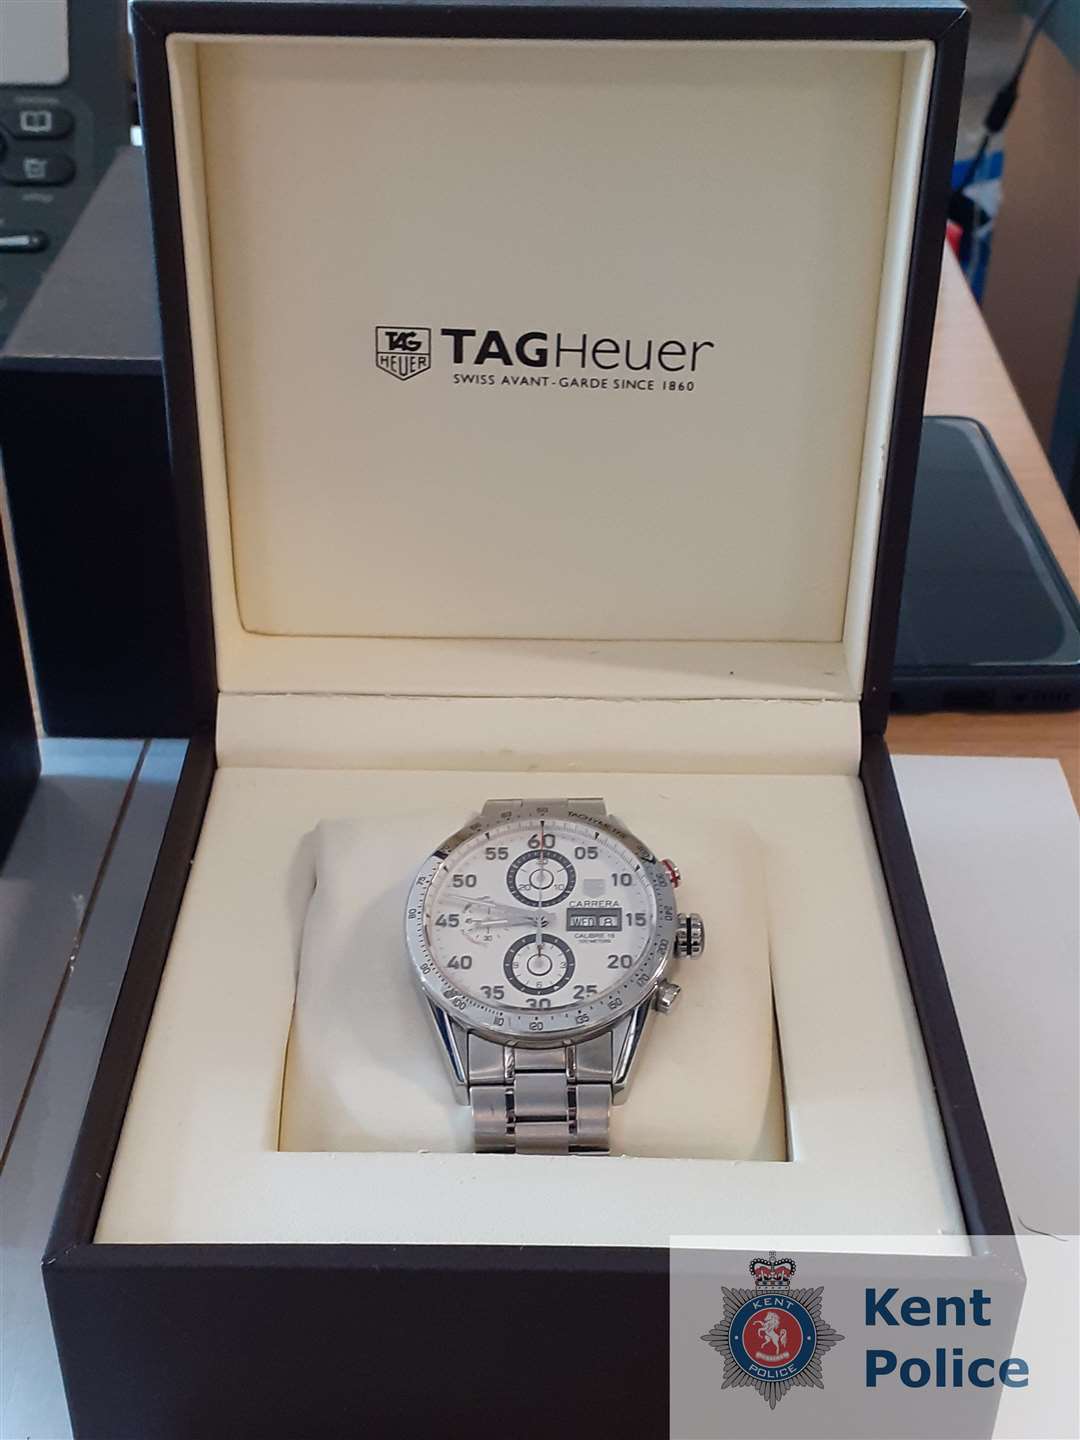 Luxury watches were also seized. Picture: Kent Police